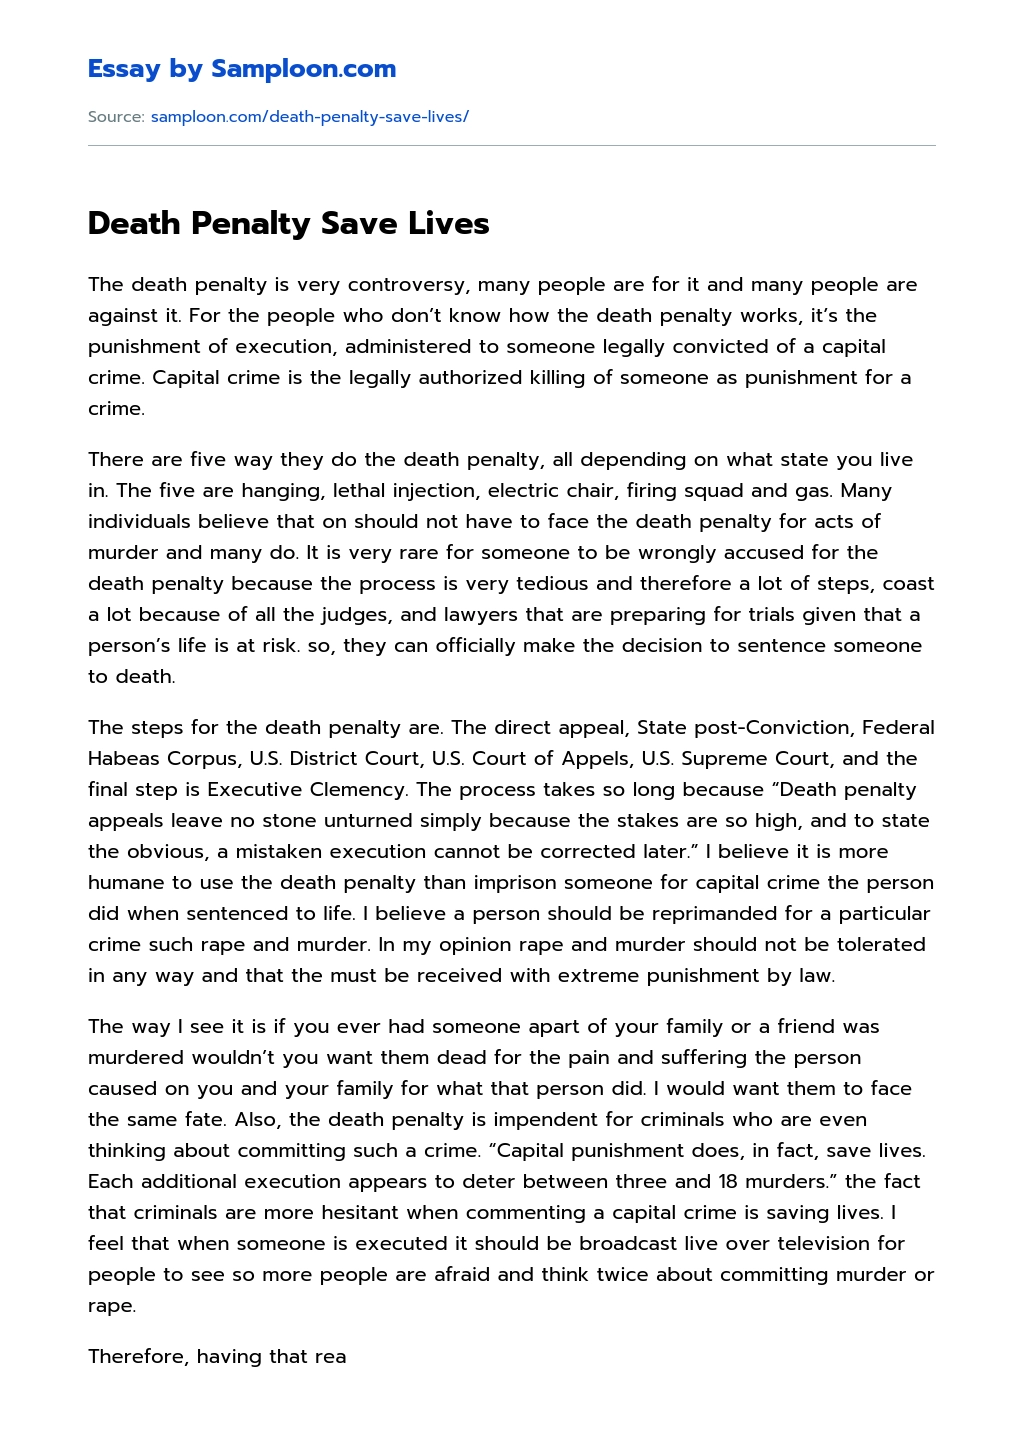 Death Penalty Save Lives essay